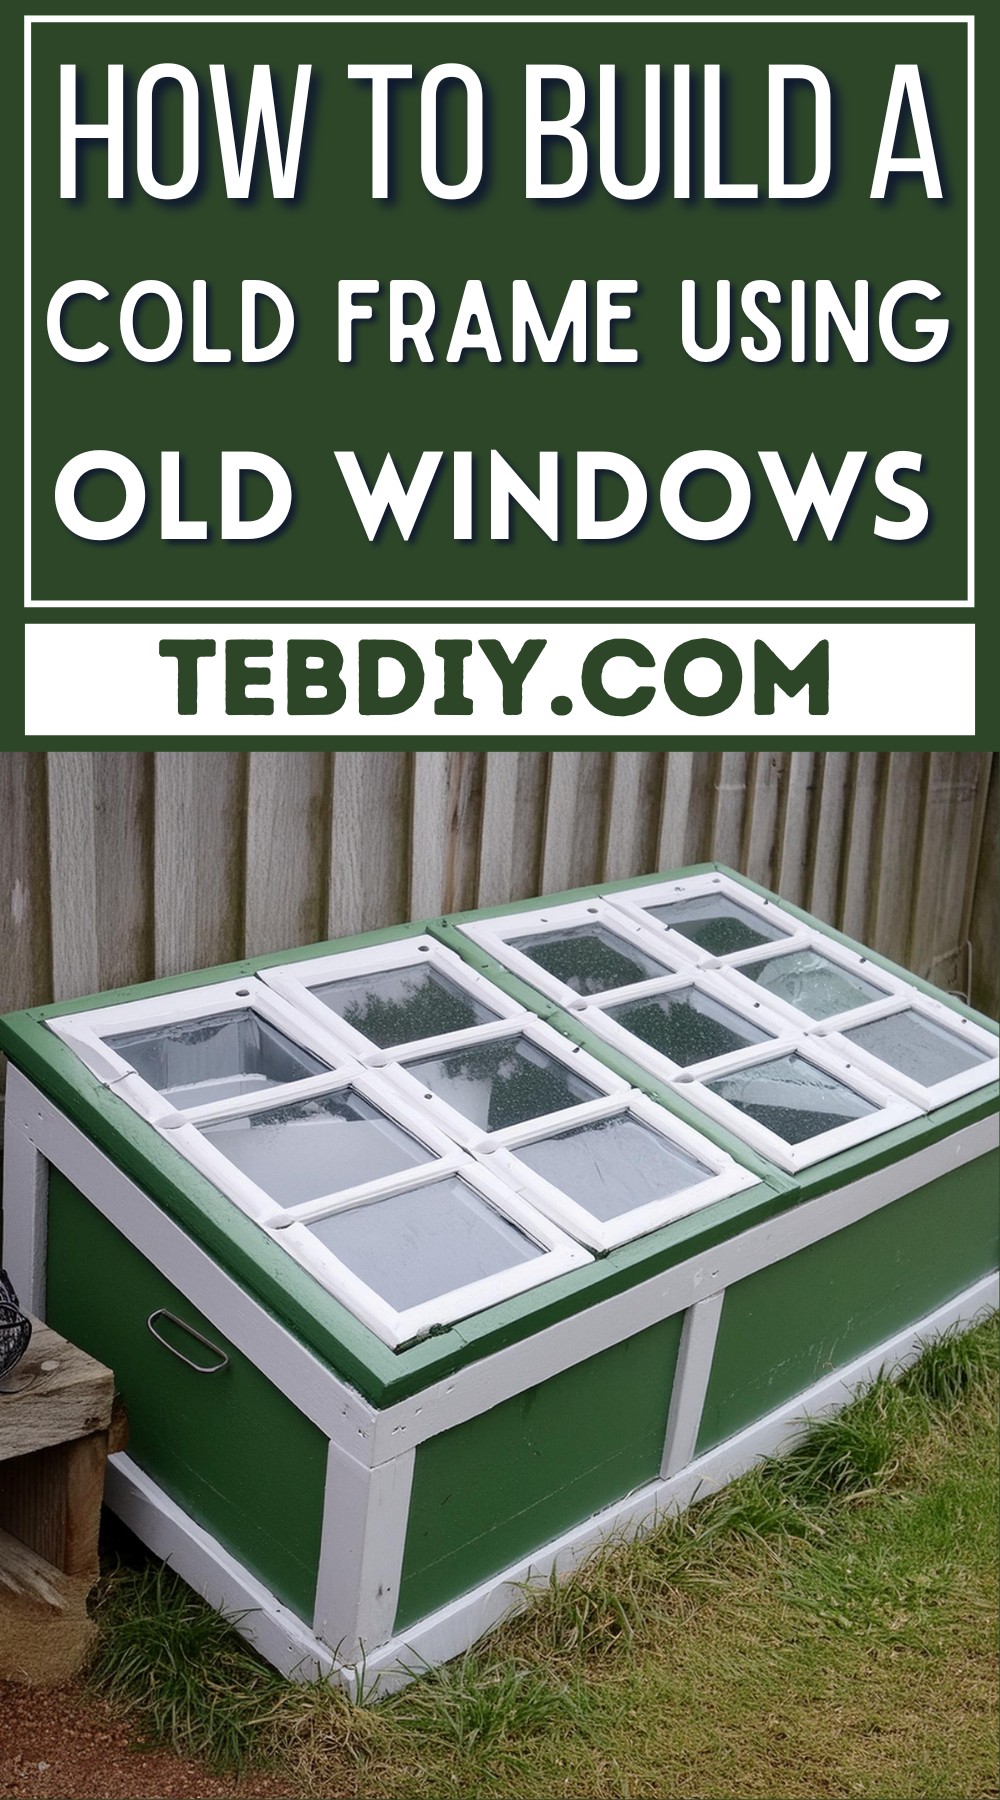 How To Build A Cold Frame Using Old Windows